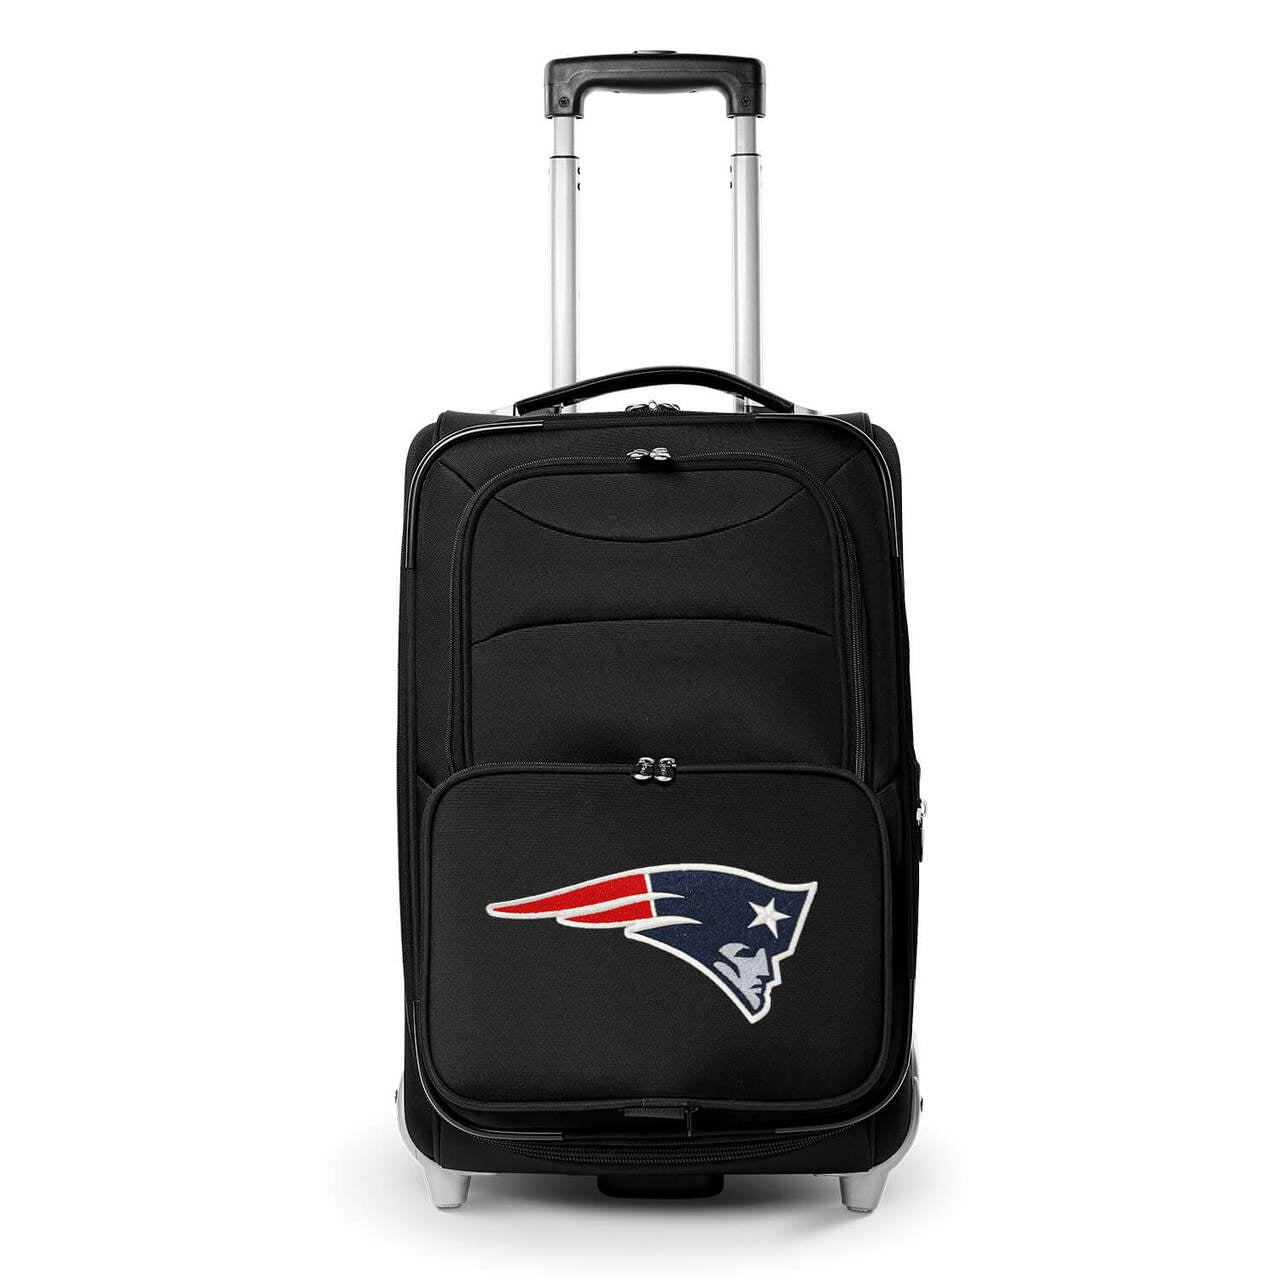 Patriots Carry On Luggage | New England Patriots Rolling Carry On Luggage